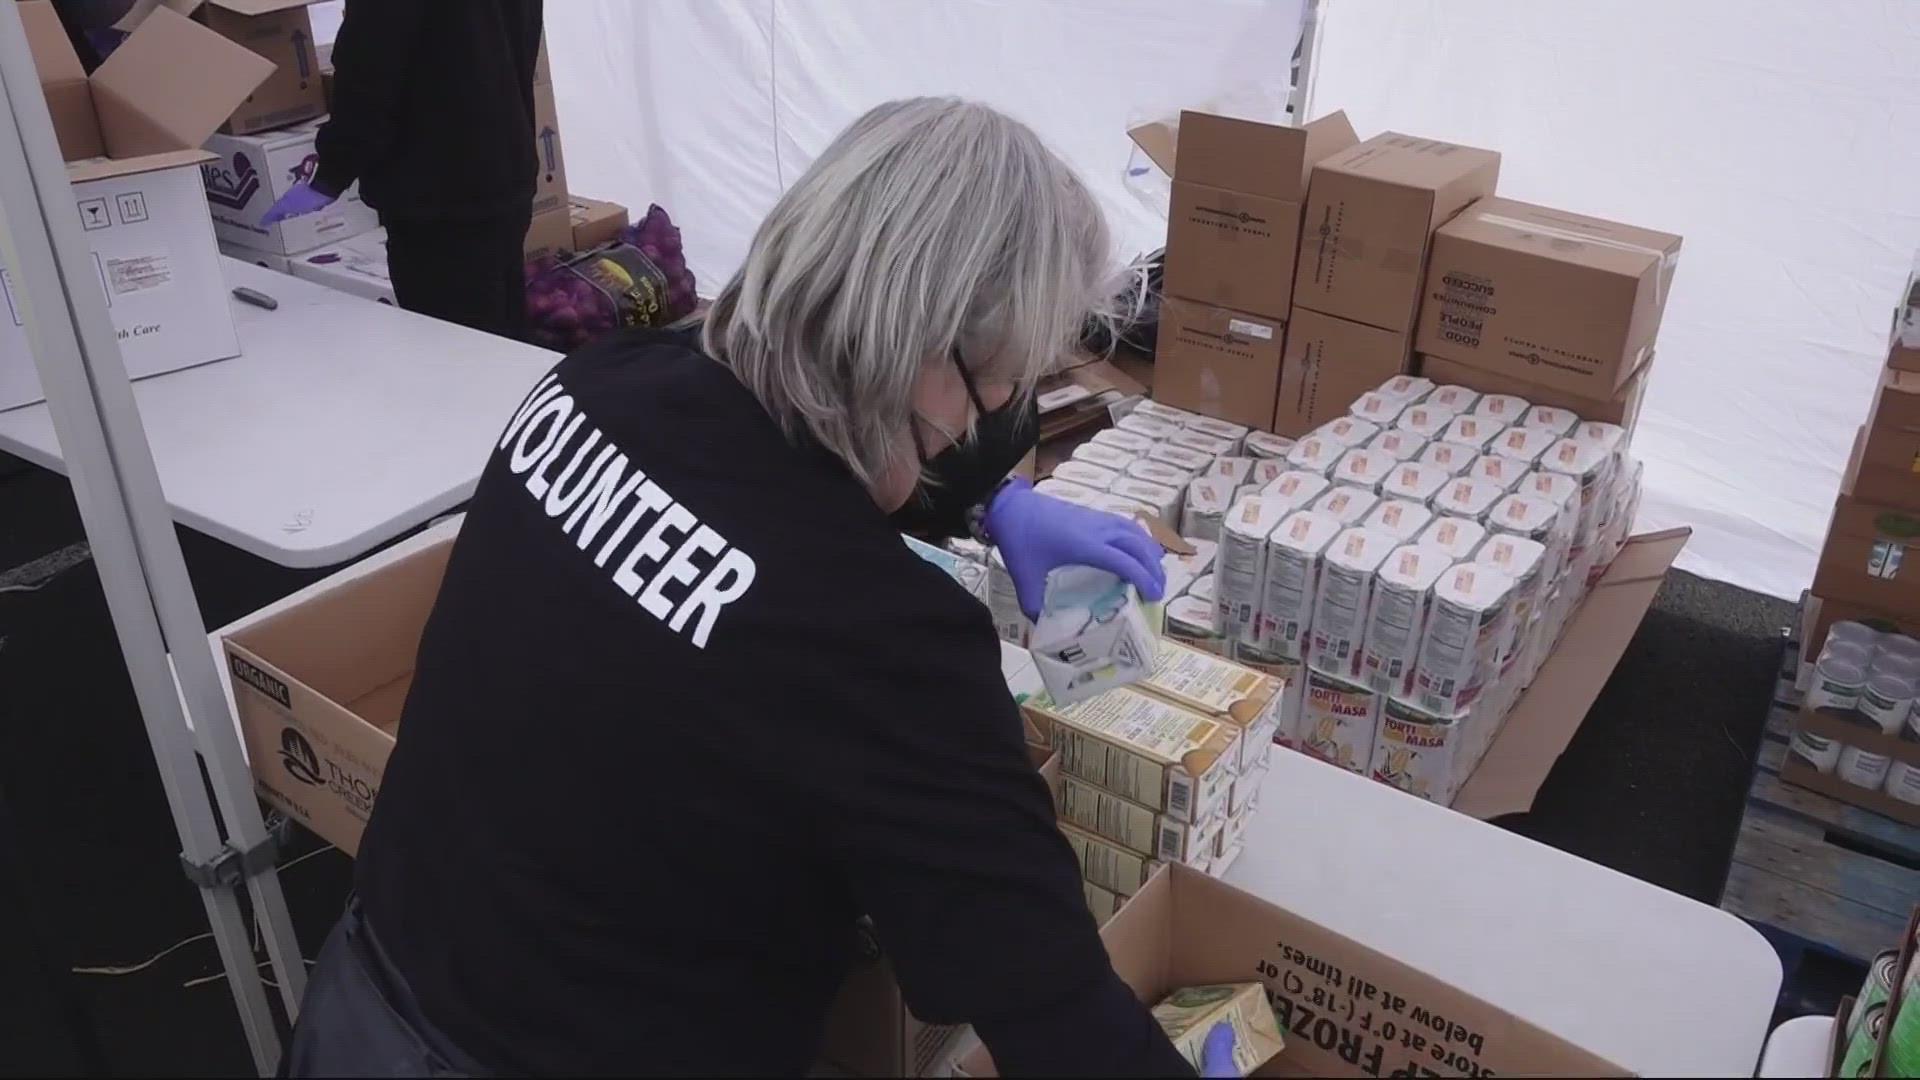 Virginia Garcia Memorial Health Center has collaborated with the Oregon Food Bank to feed families. Volunteers hand out food at a drive-thru food pantry in Beaverton